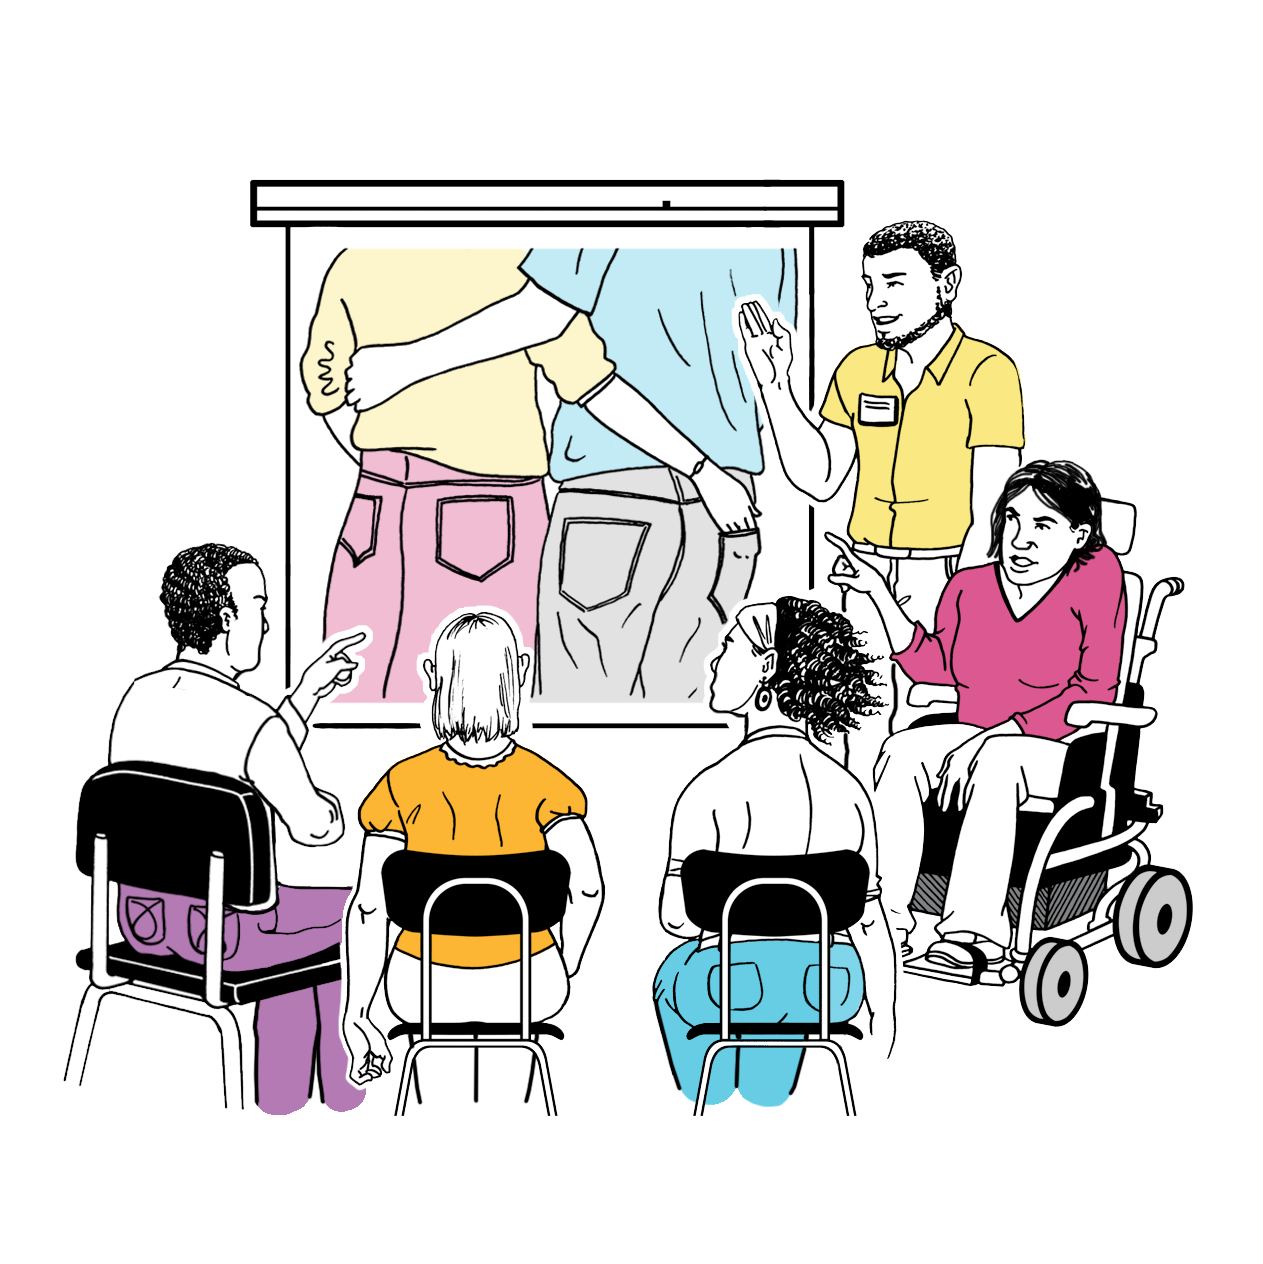 Sex Education for Adults with Disabilities